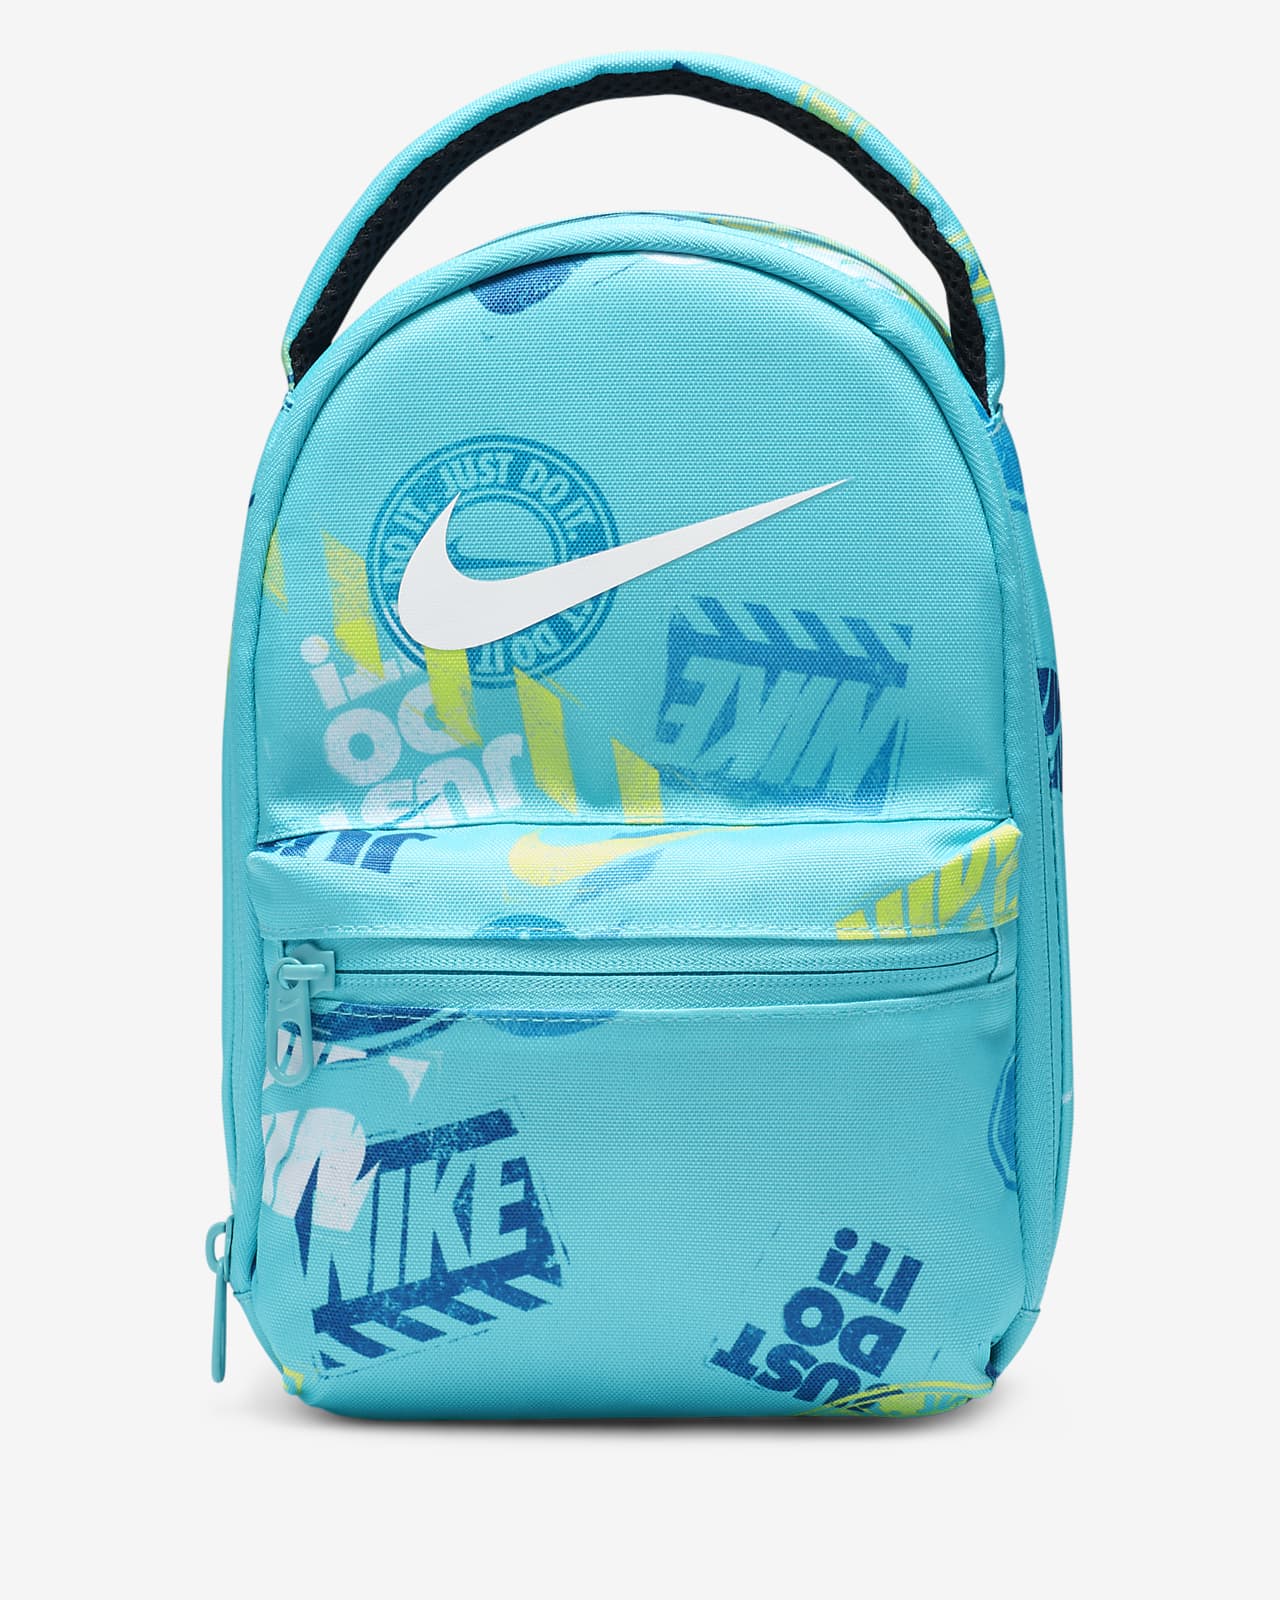 11 Best Nike Lunch Box for 2023